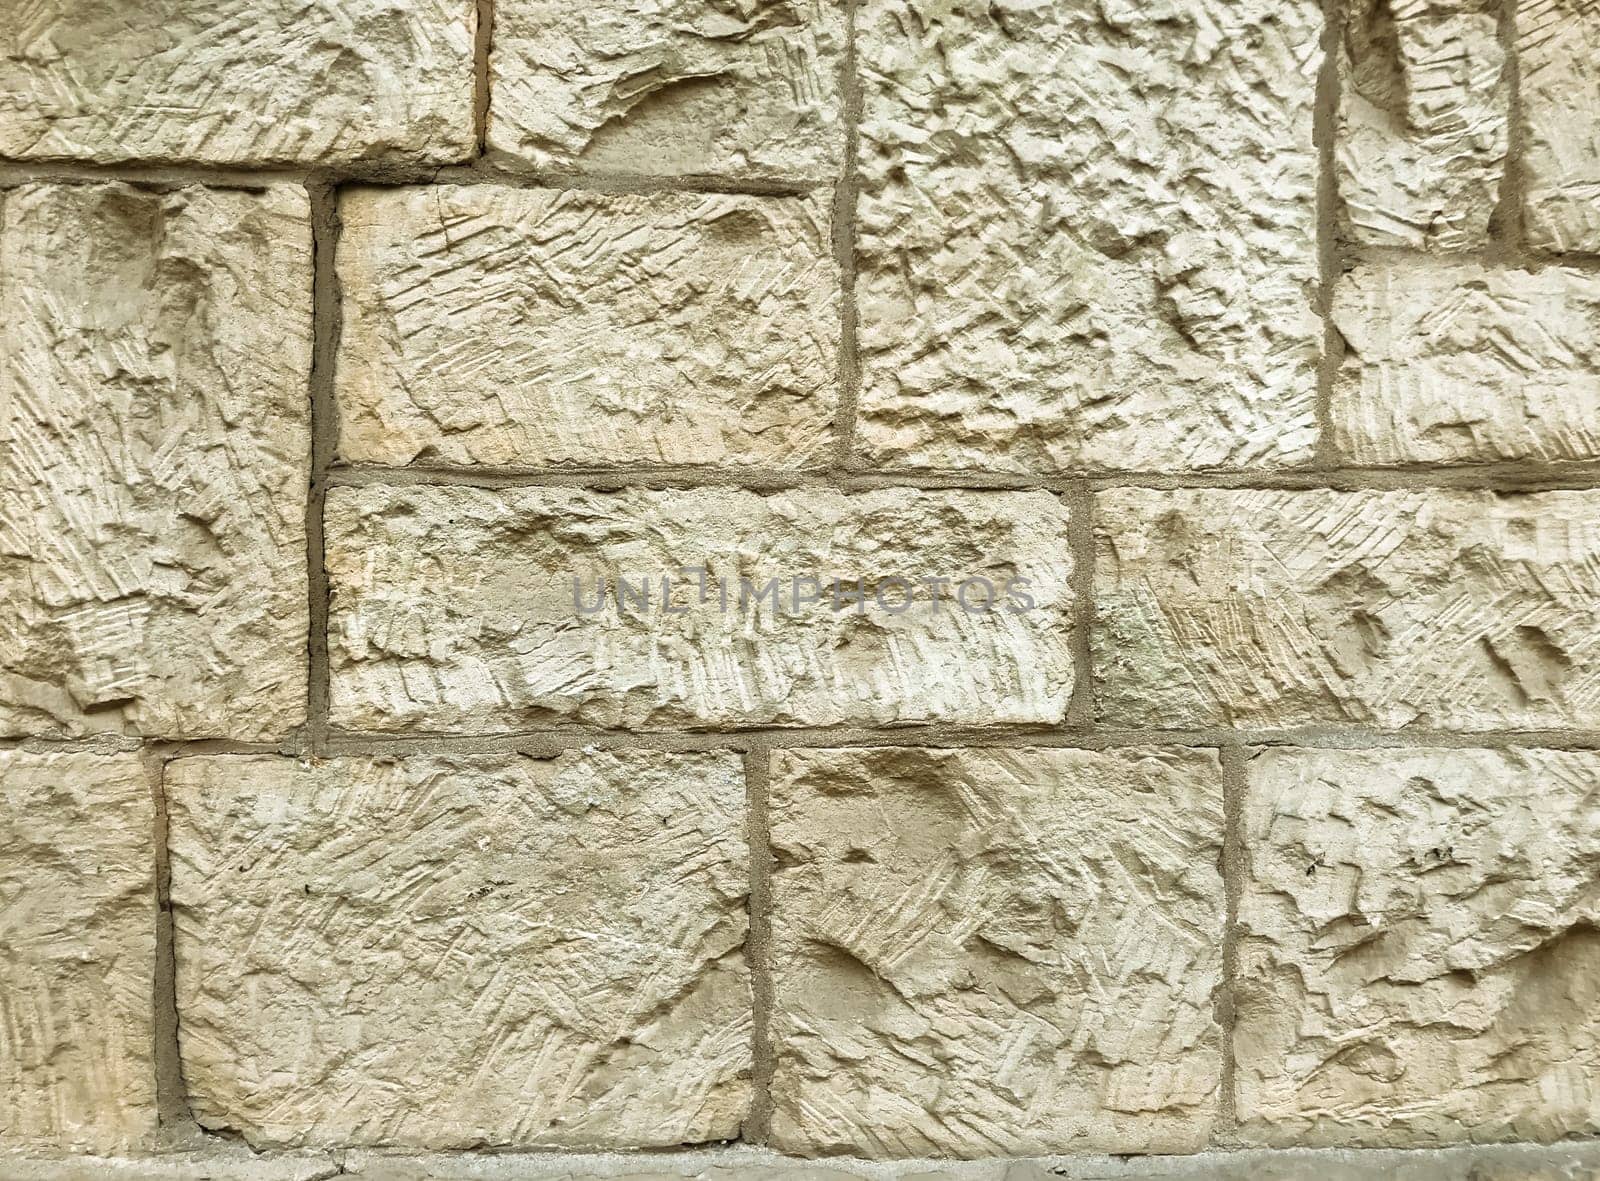 A wall made of stone with a rough texture. The wall is white and has a stone-like appearance